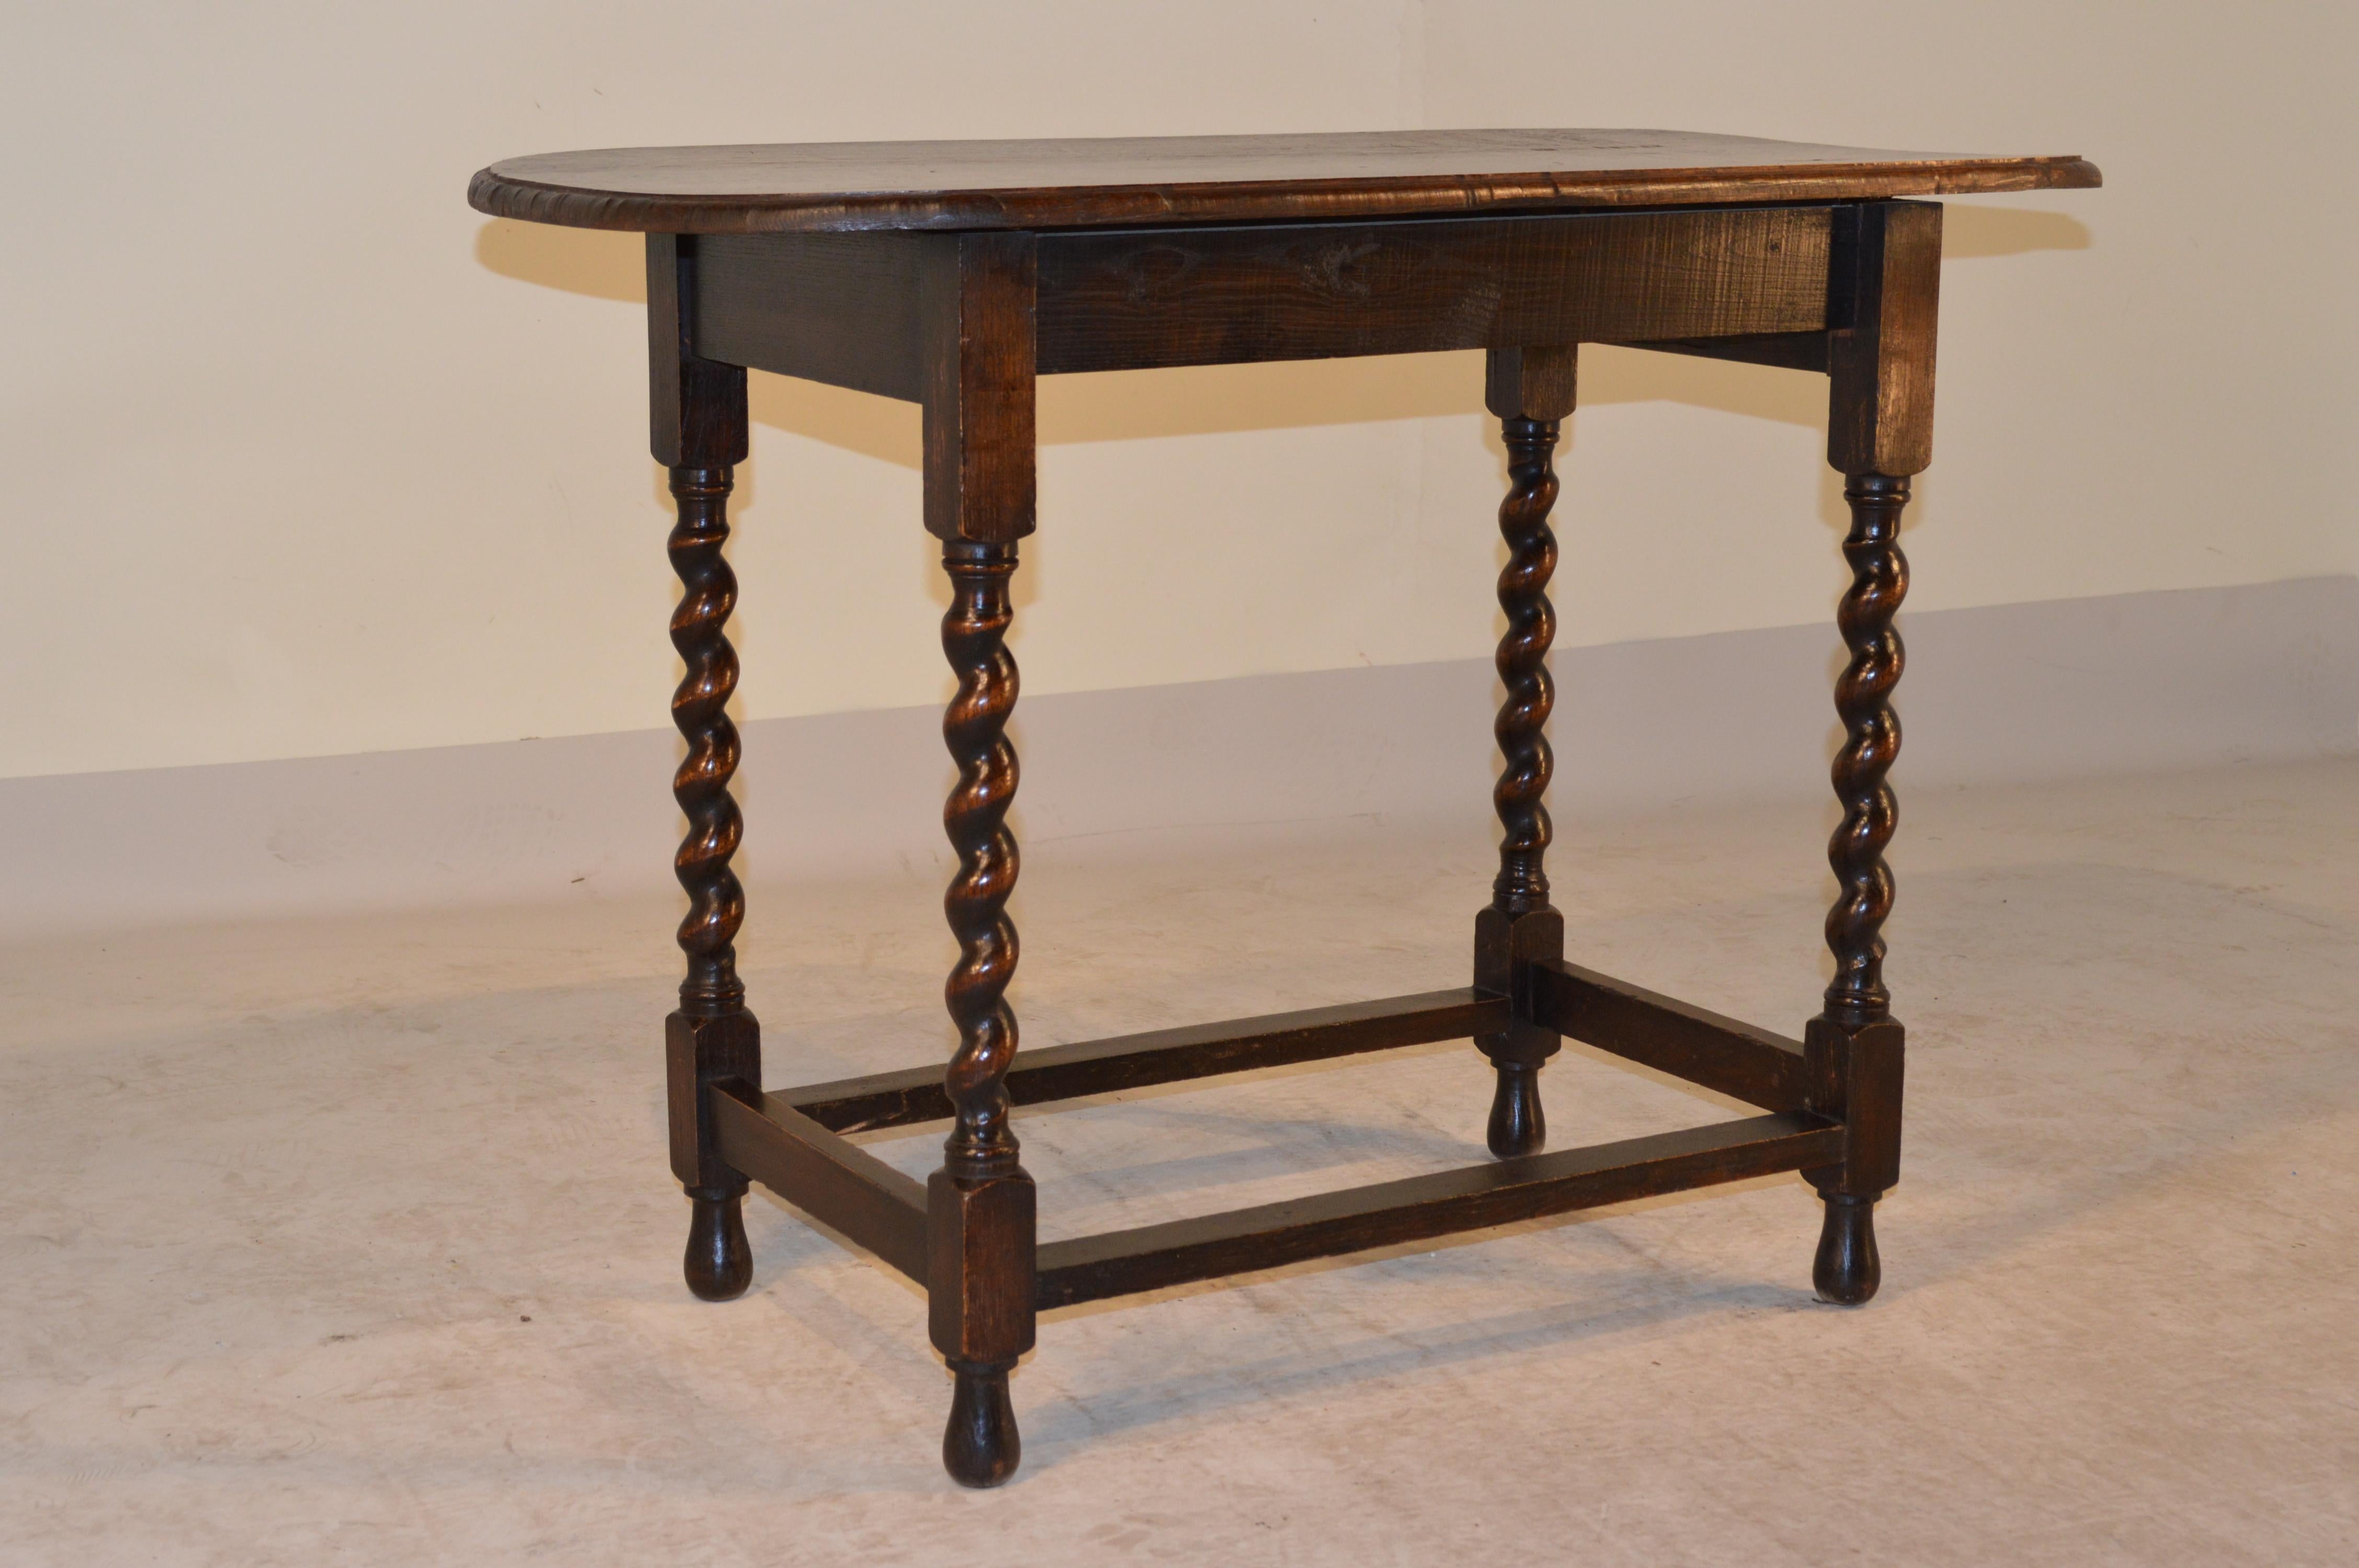 19th century English oak side table. The oval top has a hand-beveled edge and follows down to an apron connected to hand-turned barley-twist legs joined by stretchers. Raised on hand-turned feet.
  